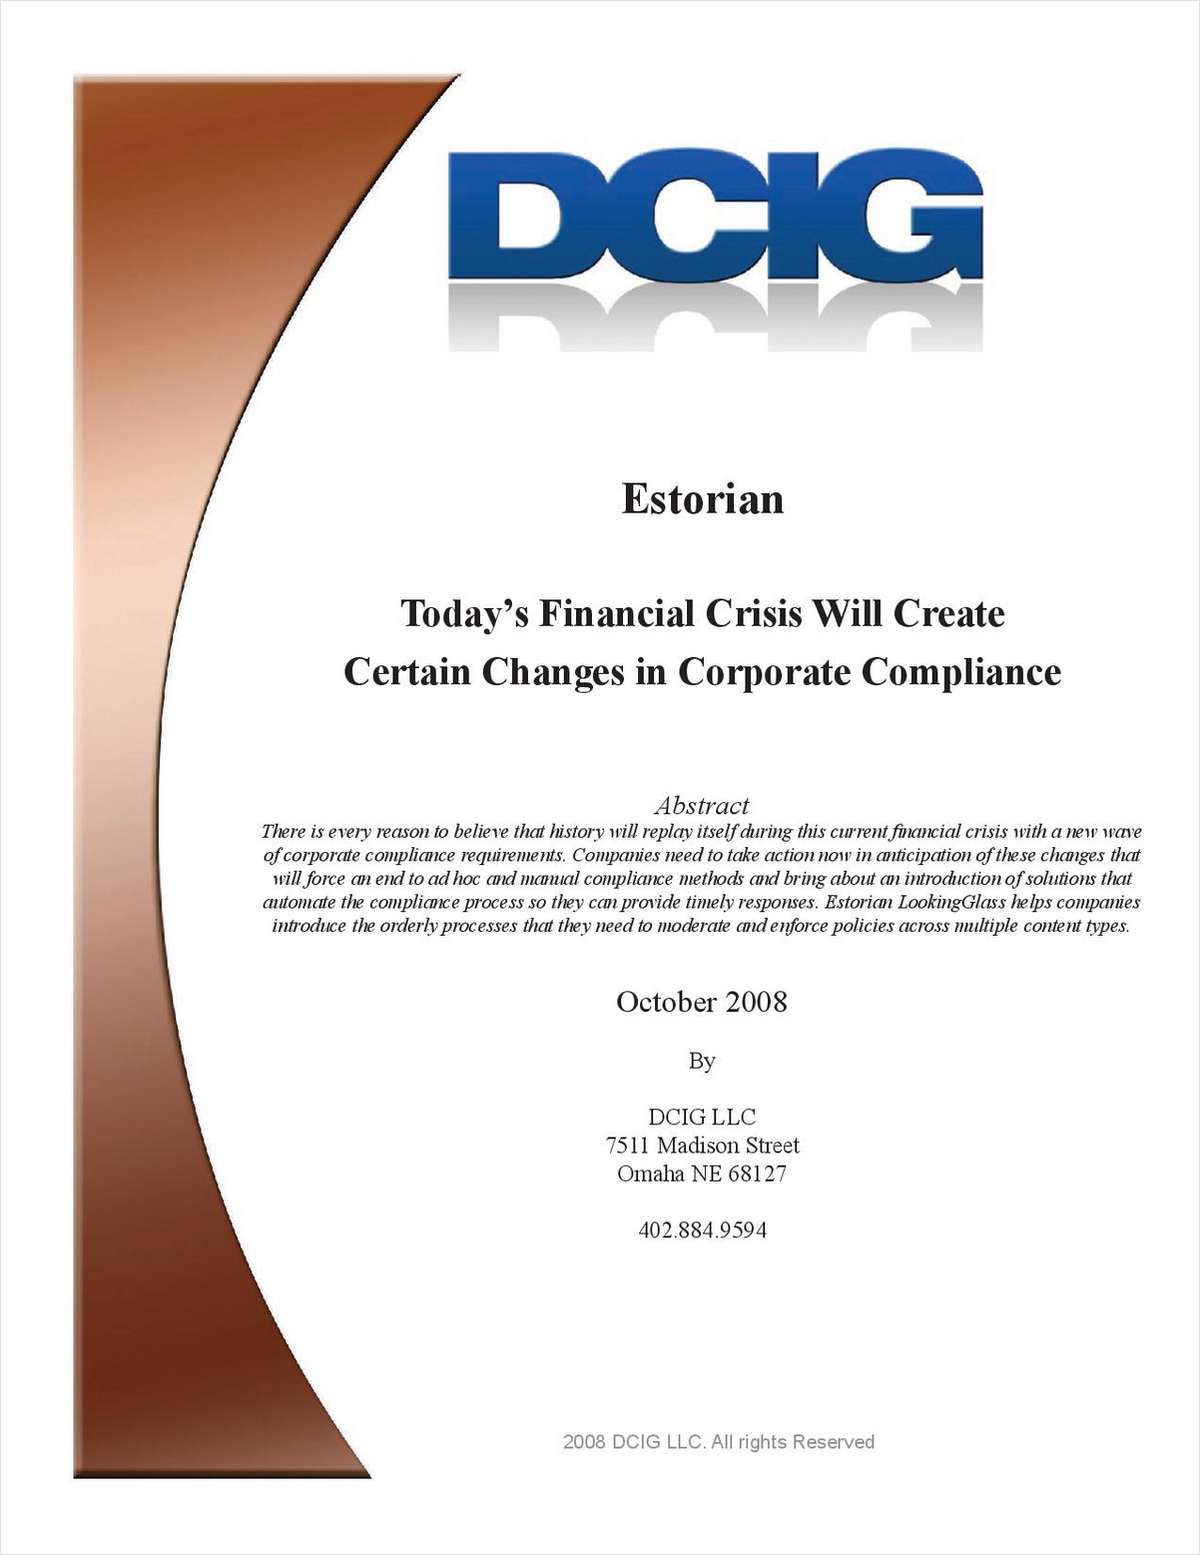 Today's Financial Crisis and the Impact on Corporate Compliance